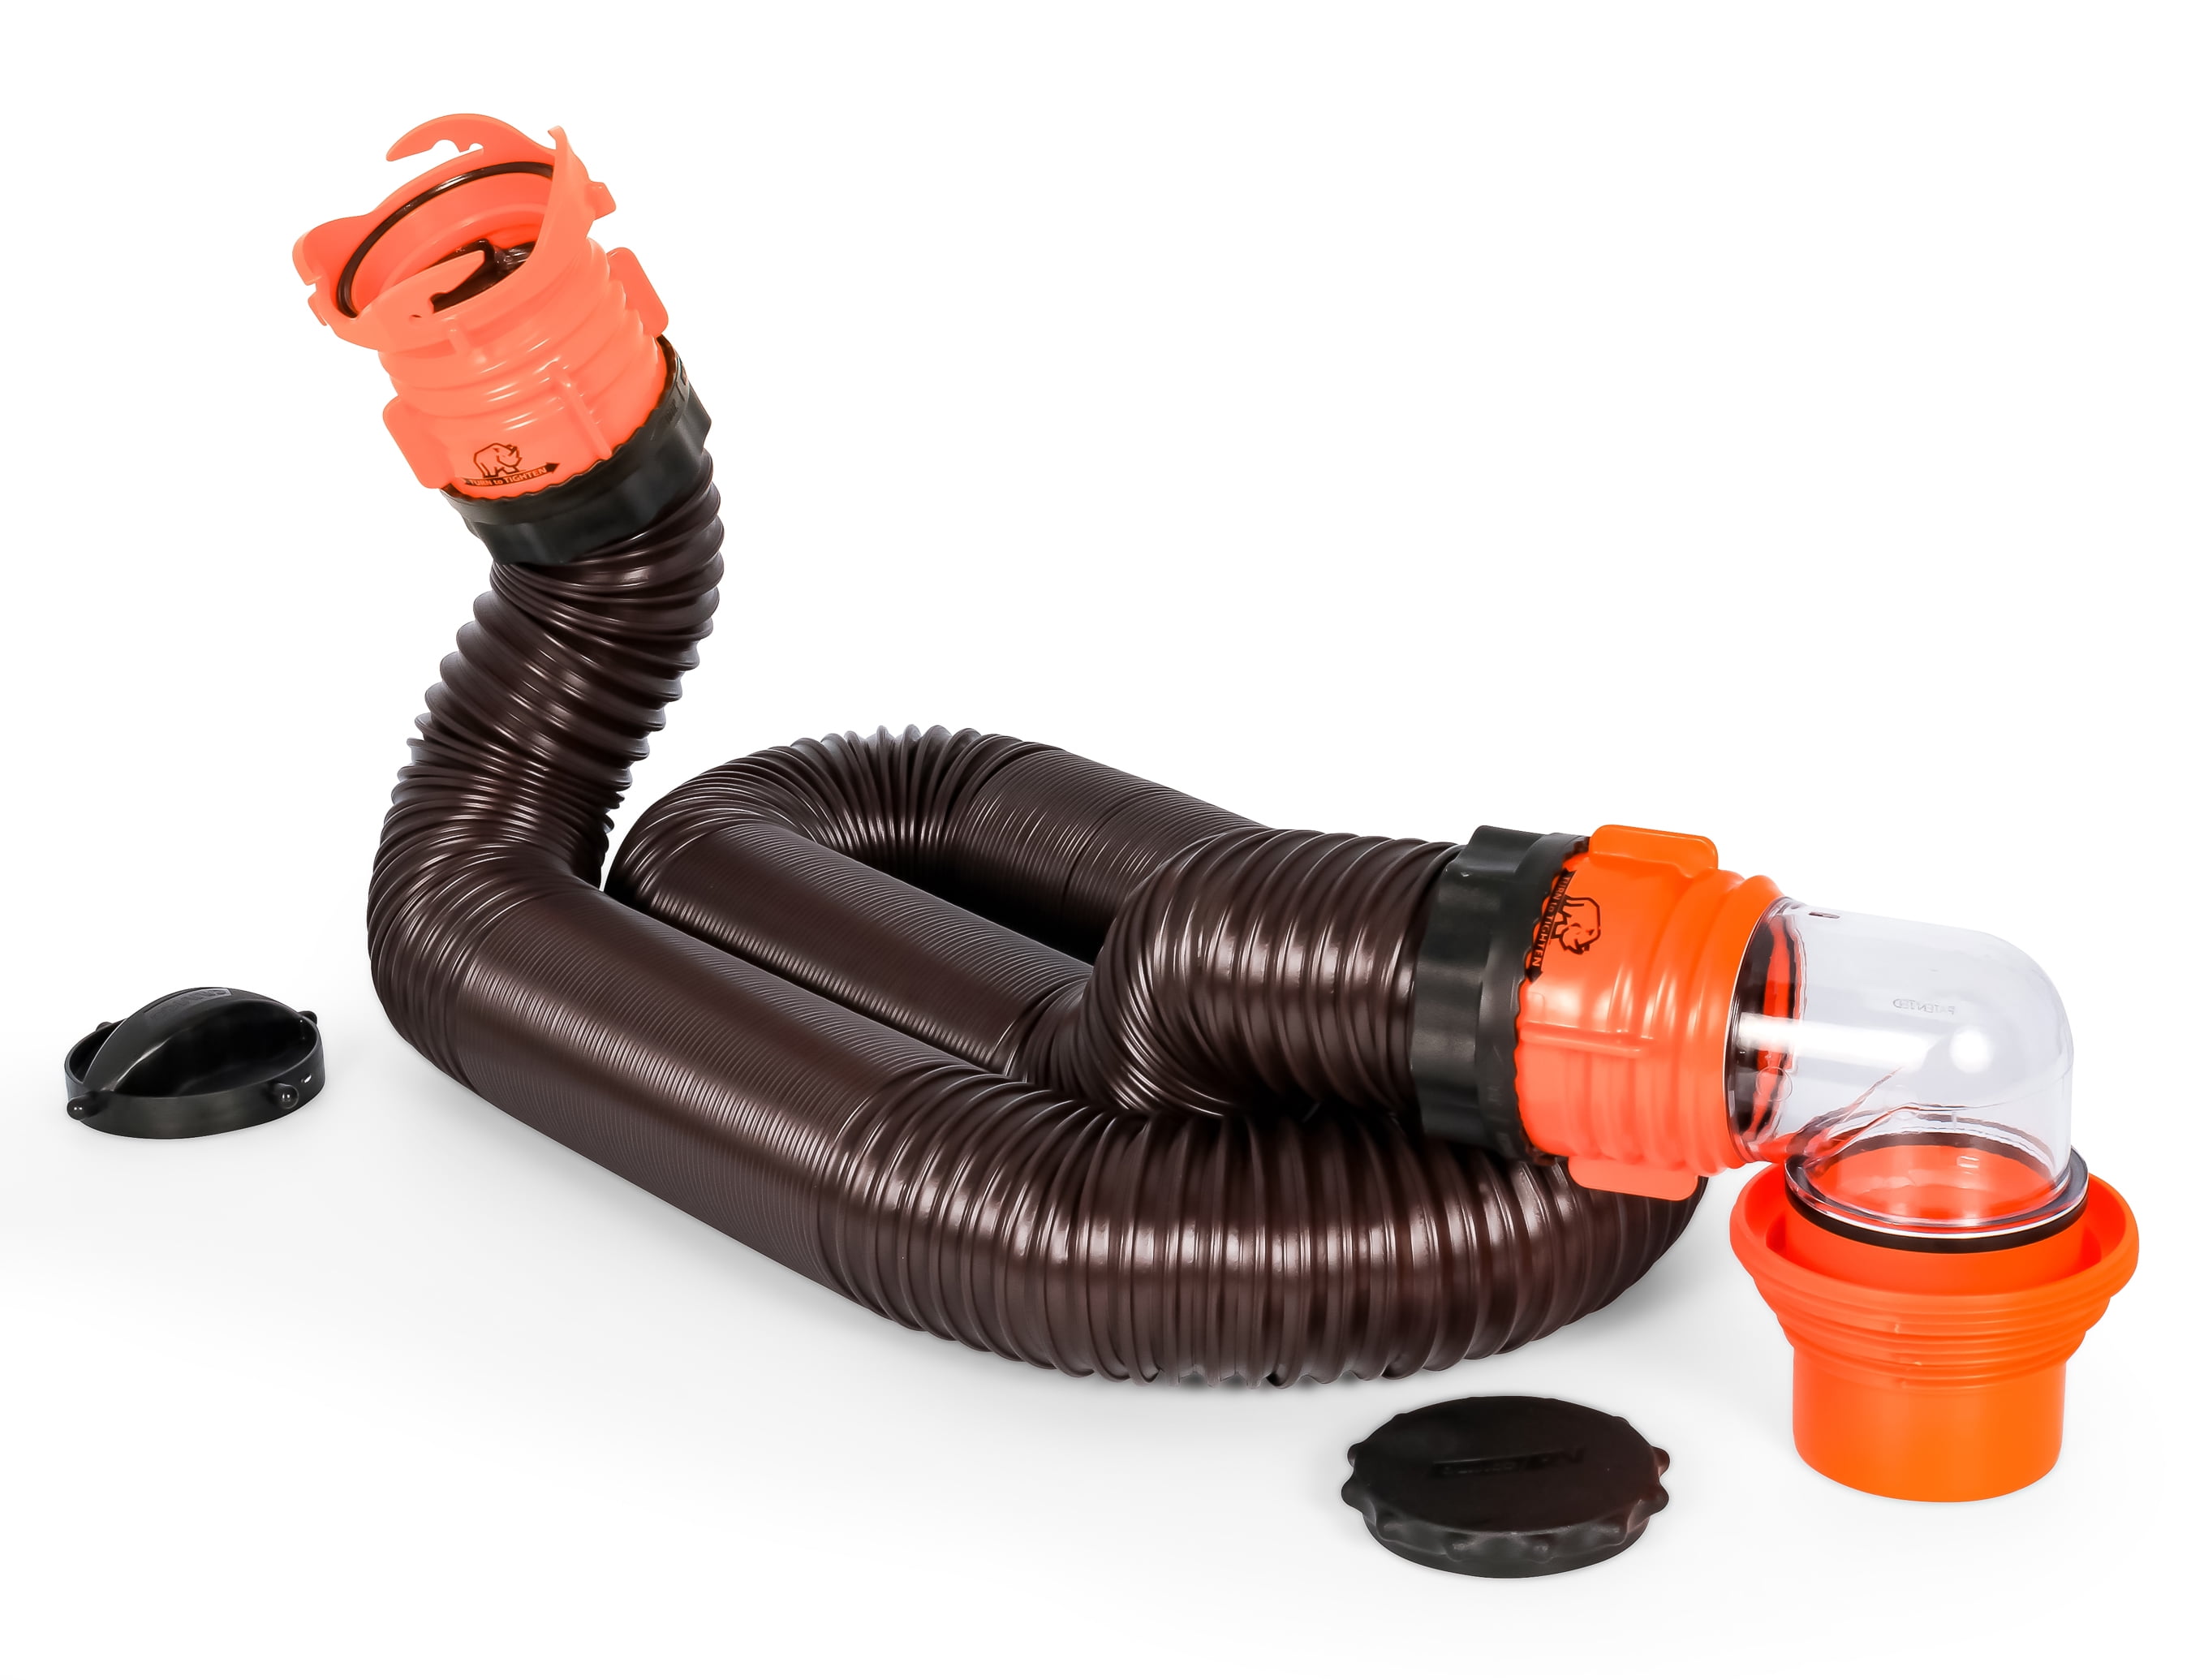 Camco RhinoEXTREME 20' Sewer Hose Kit with Swivel Fittings 